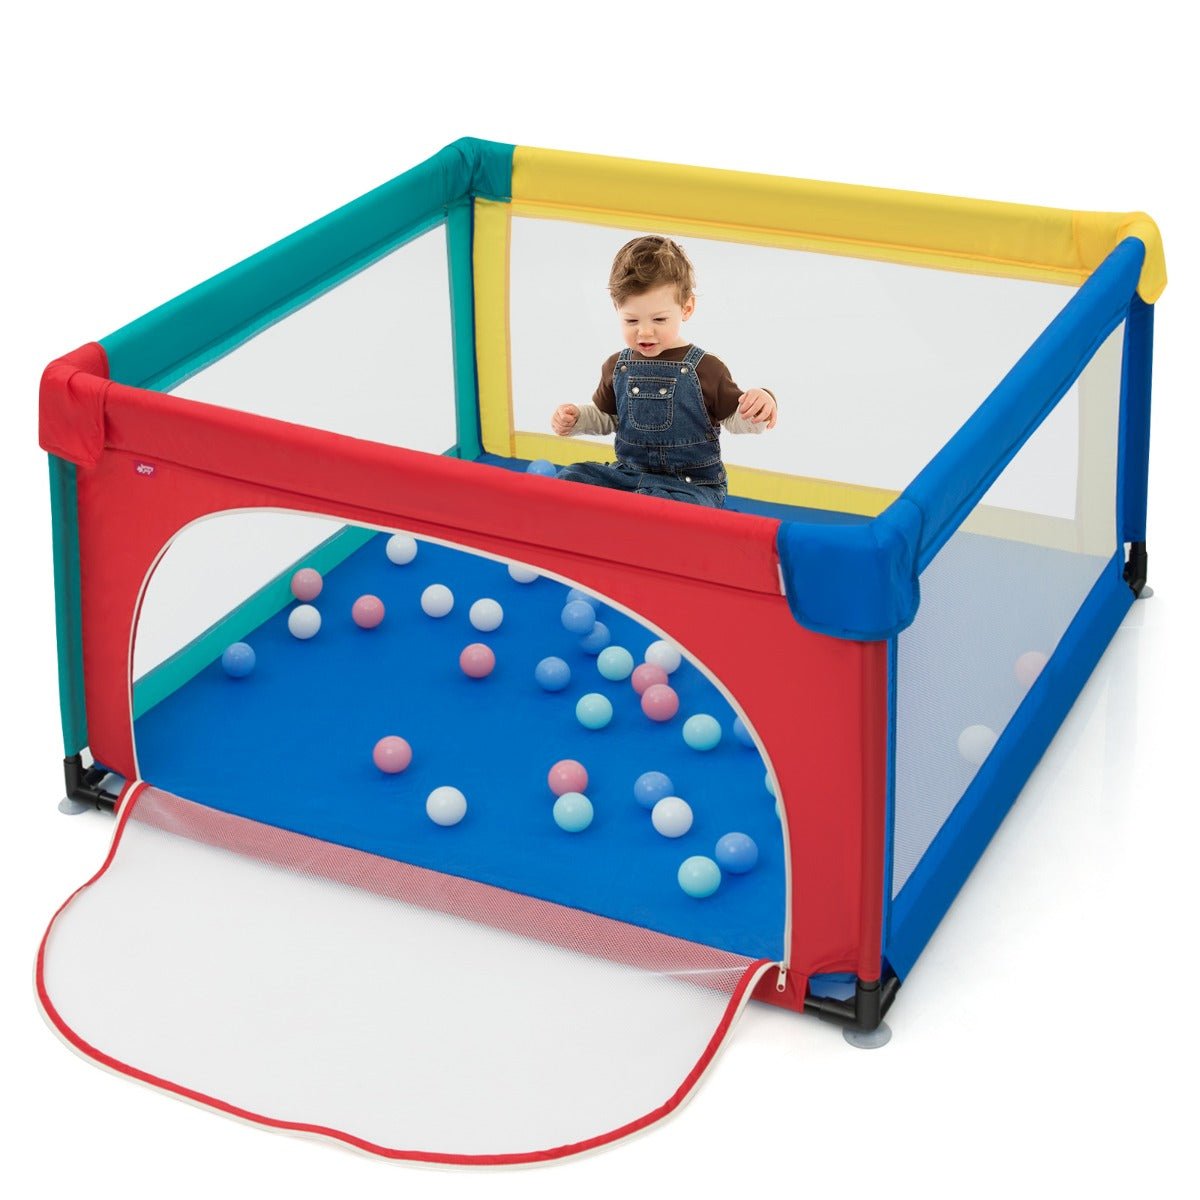 Safety Activity Fence Playpen: Multicolour Design for Baby and Toddler, Comes with 50 Ocean Balls